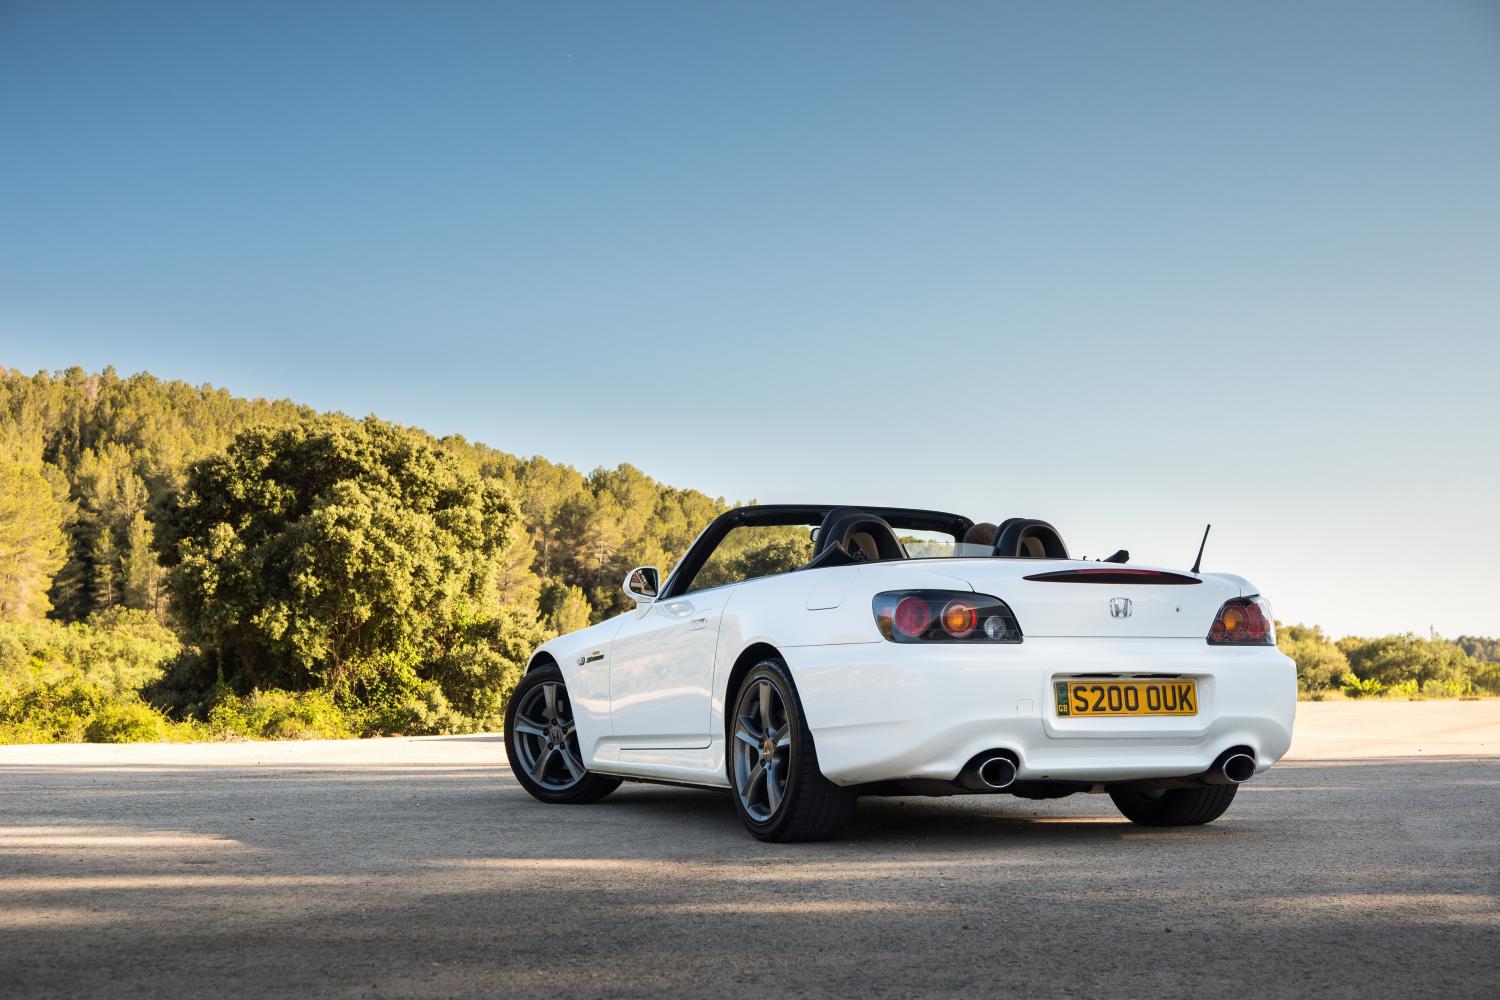 Remembering The Five-Cylinder Concept That Became The Honda S2000